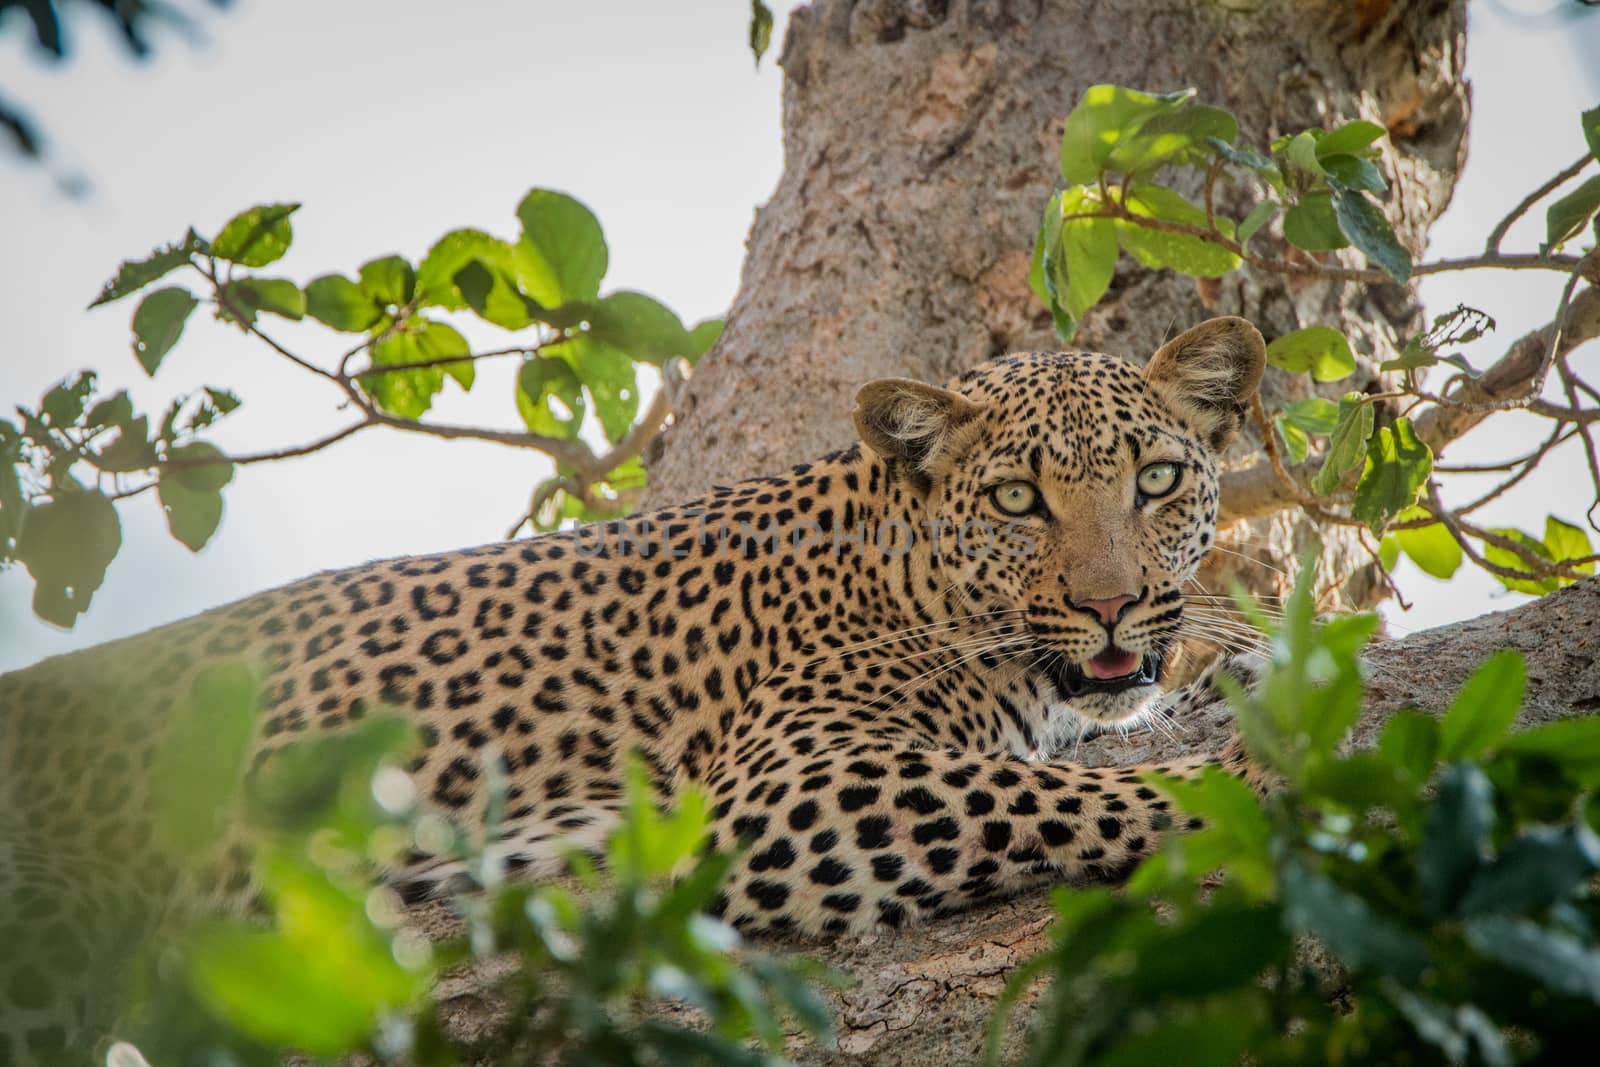 Leopard laying in a tree in the Kruger National Park, South Africa.